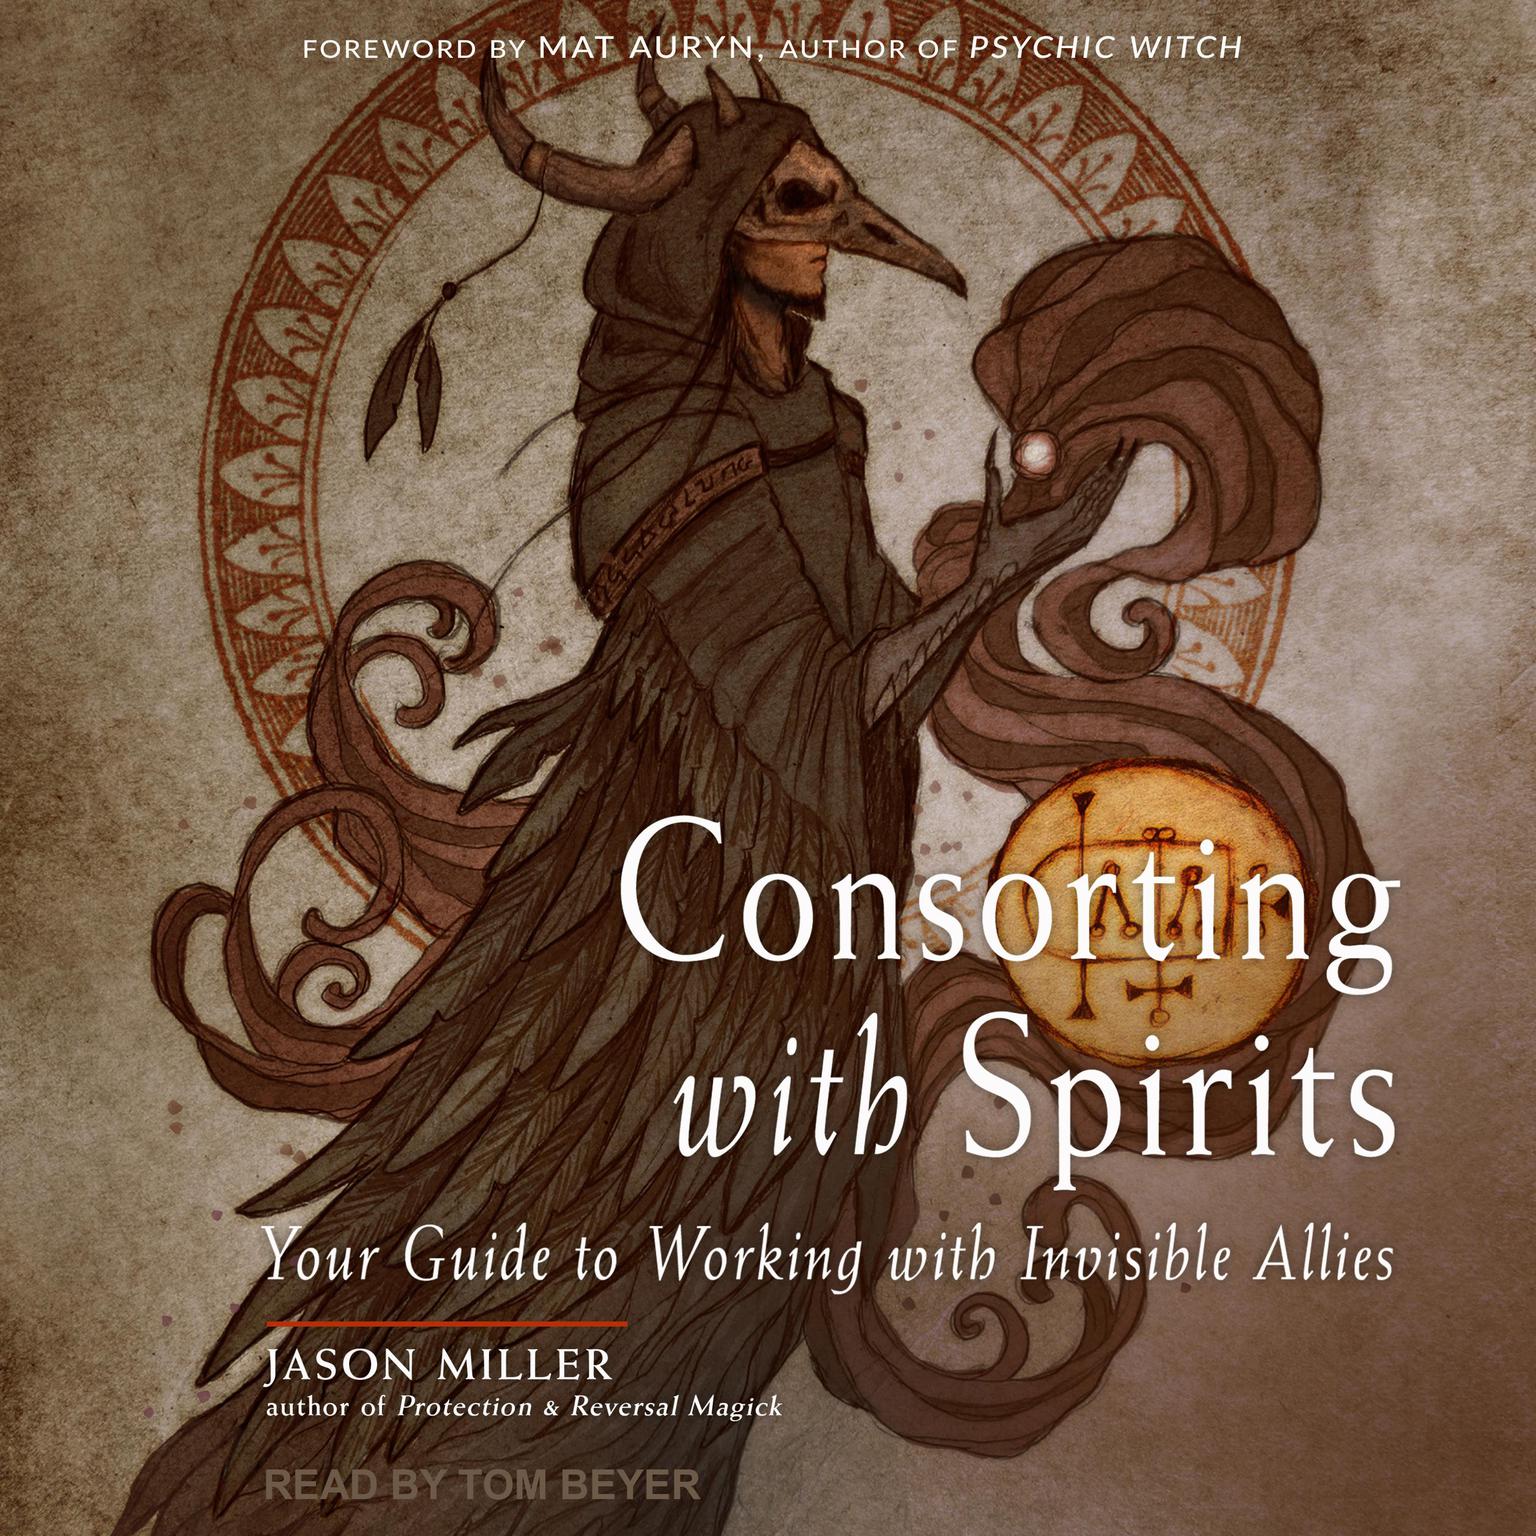 Consorting with Spirits: Your Guide to Working with Invisible Allies Audiobook, by Jason Miller